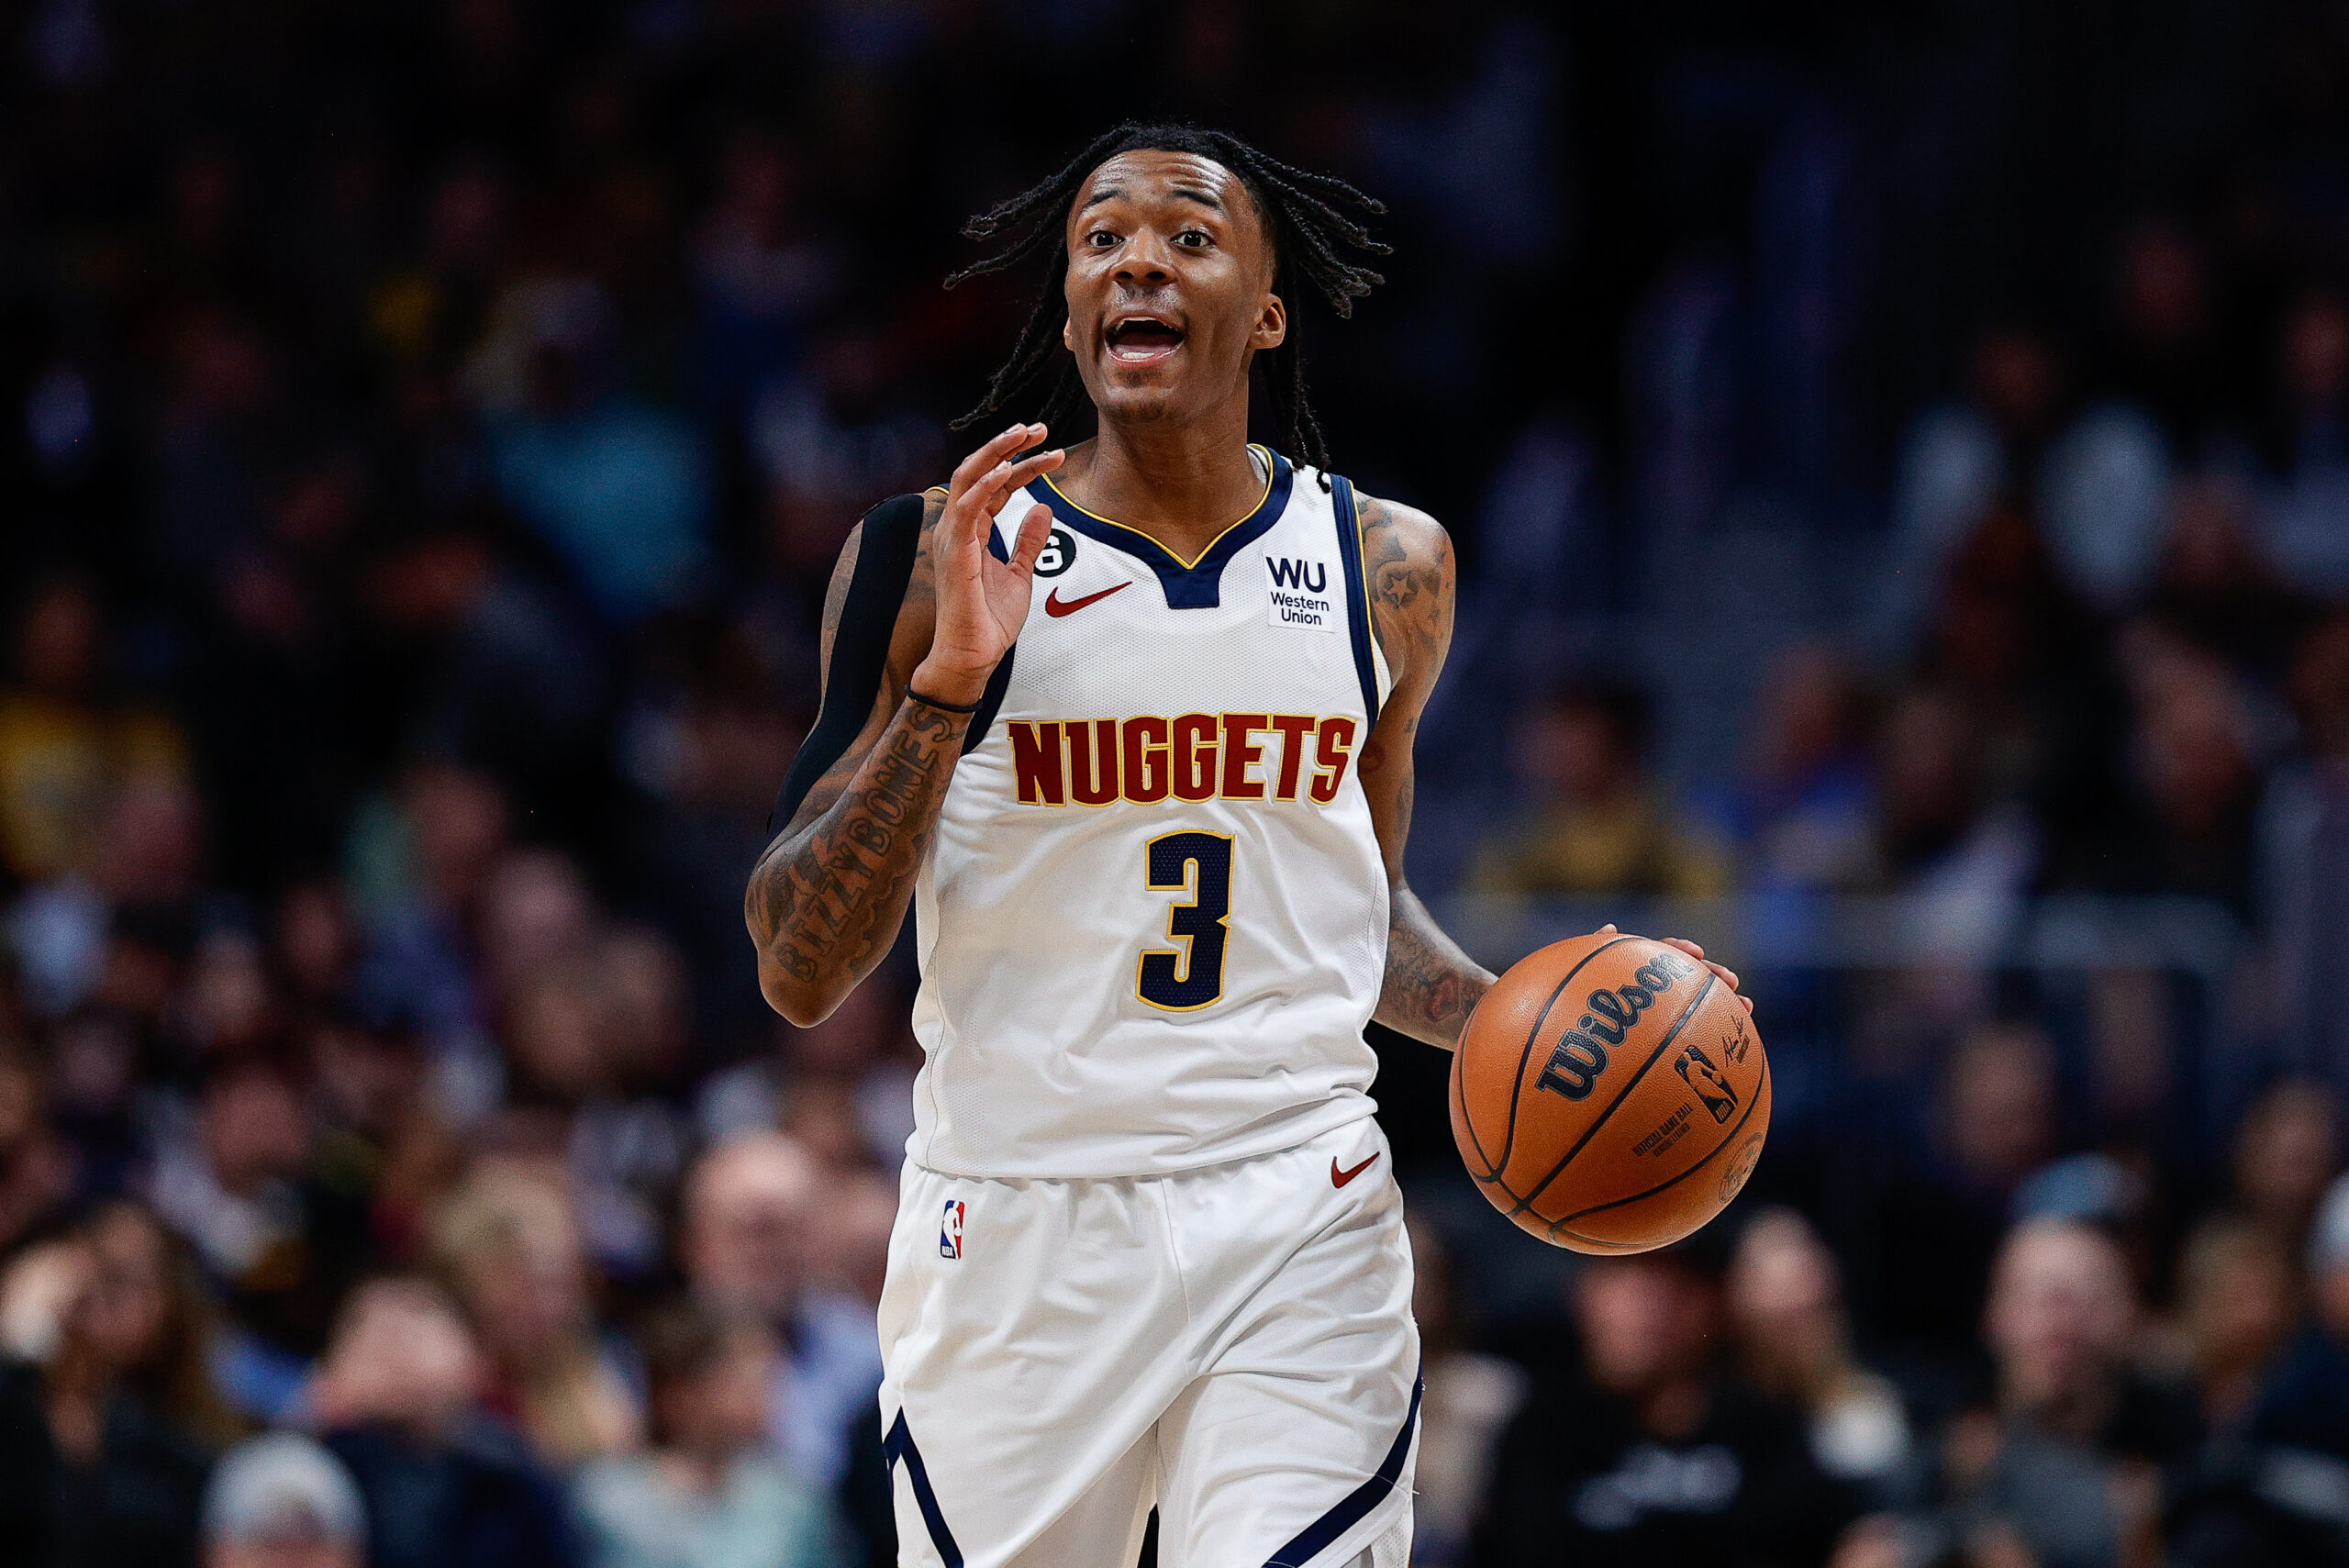 The New Orleans Pelicans can't afford to lose Naji Marshall in free agency